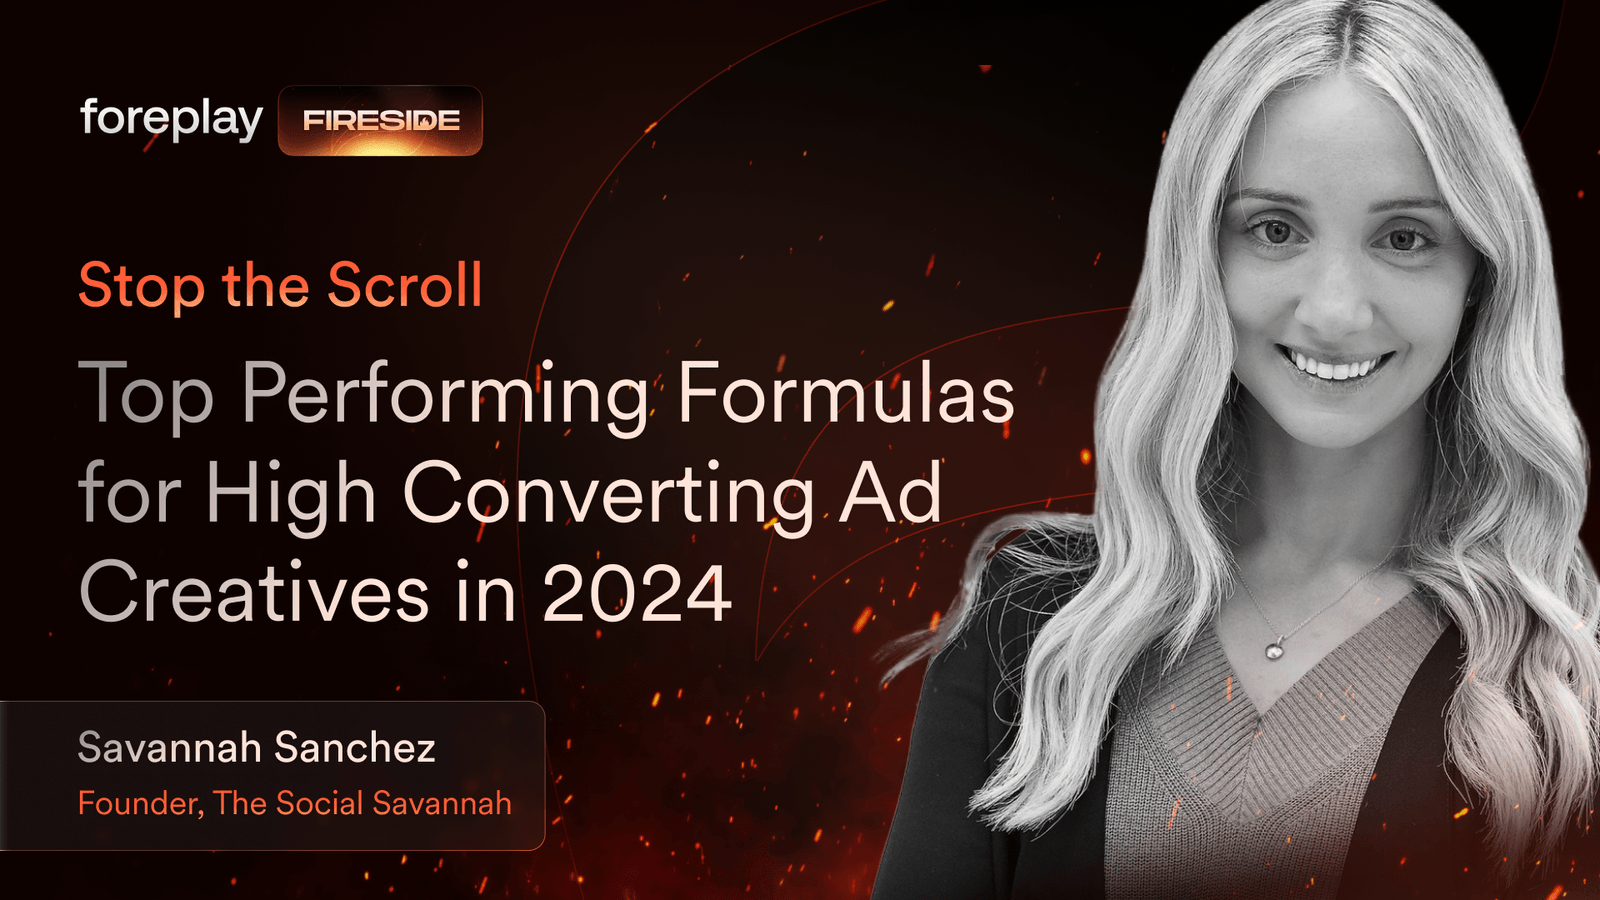 Stop the Scroll: Top Performing Formulas for High Converting Ad Creatives in 2024